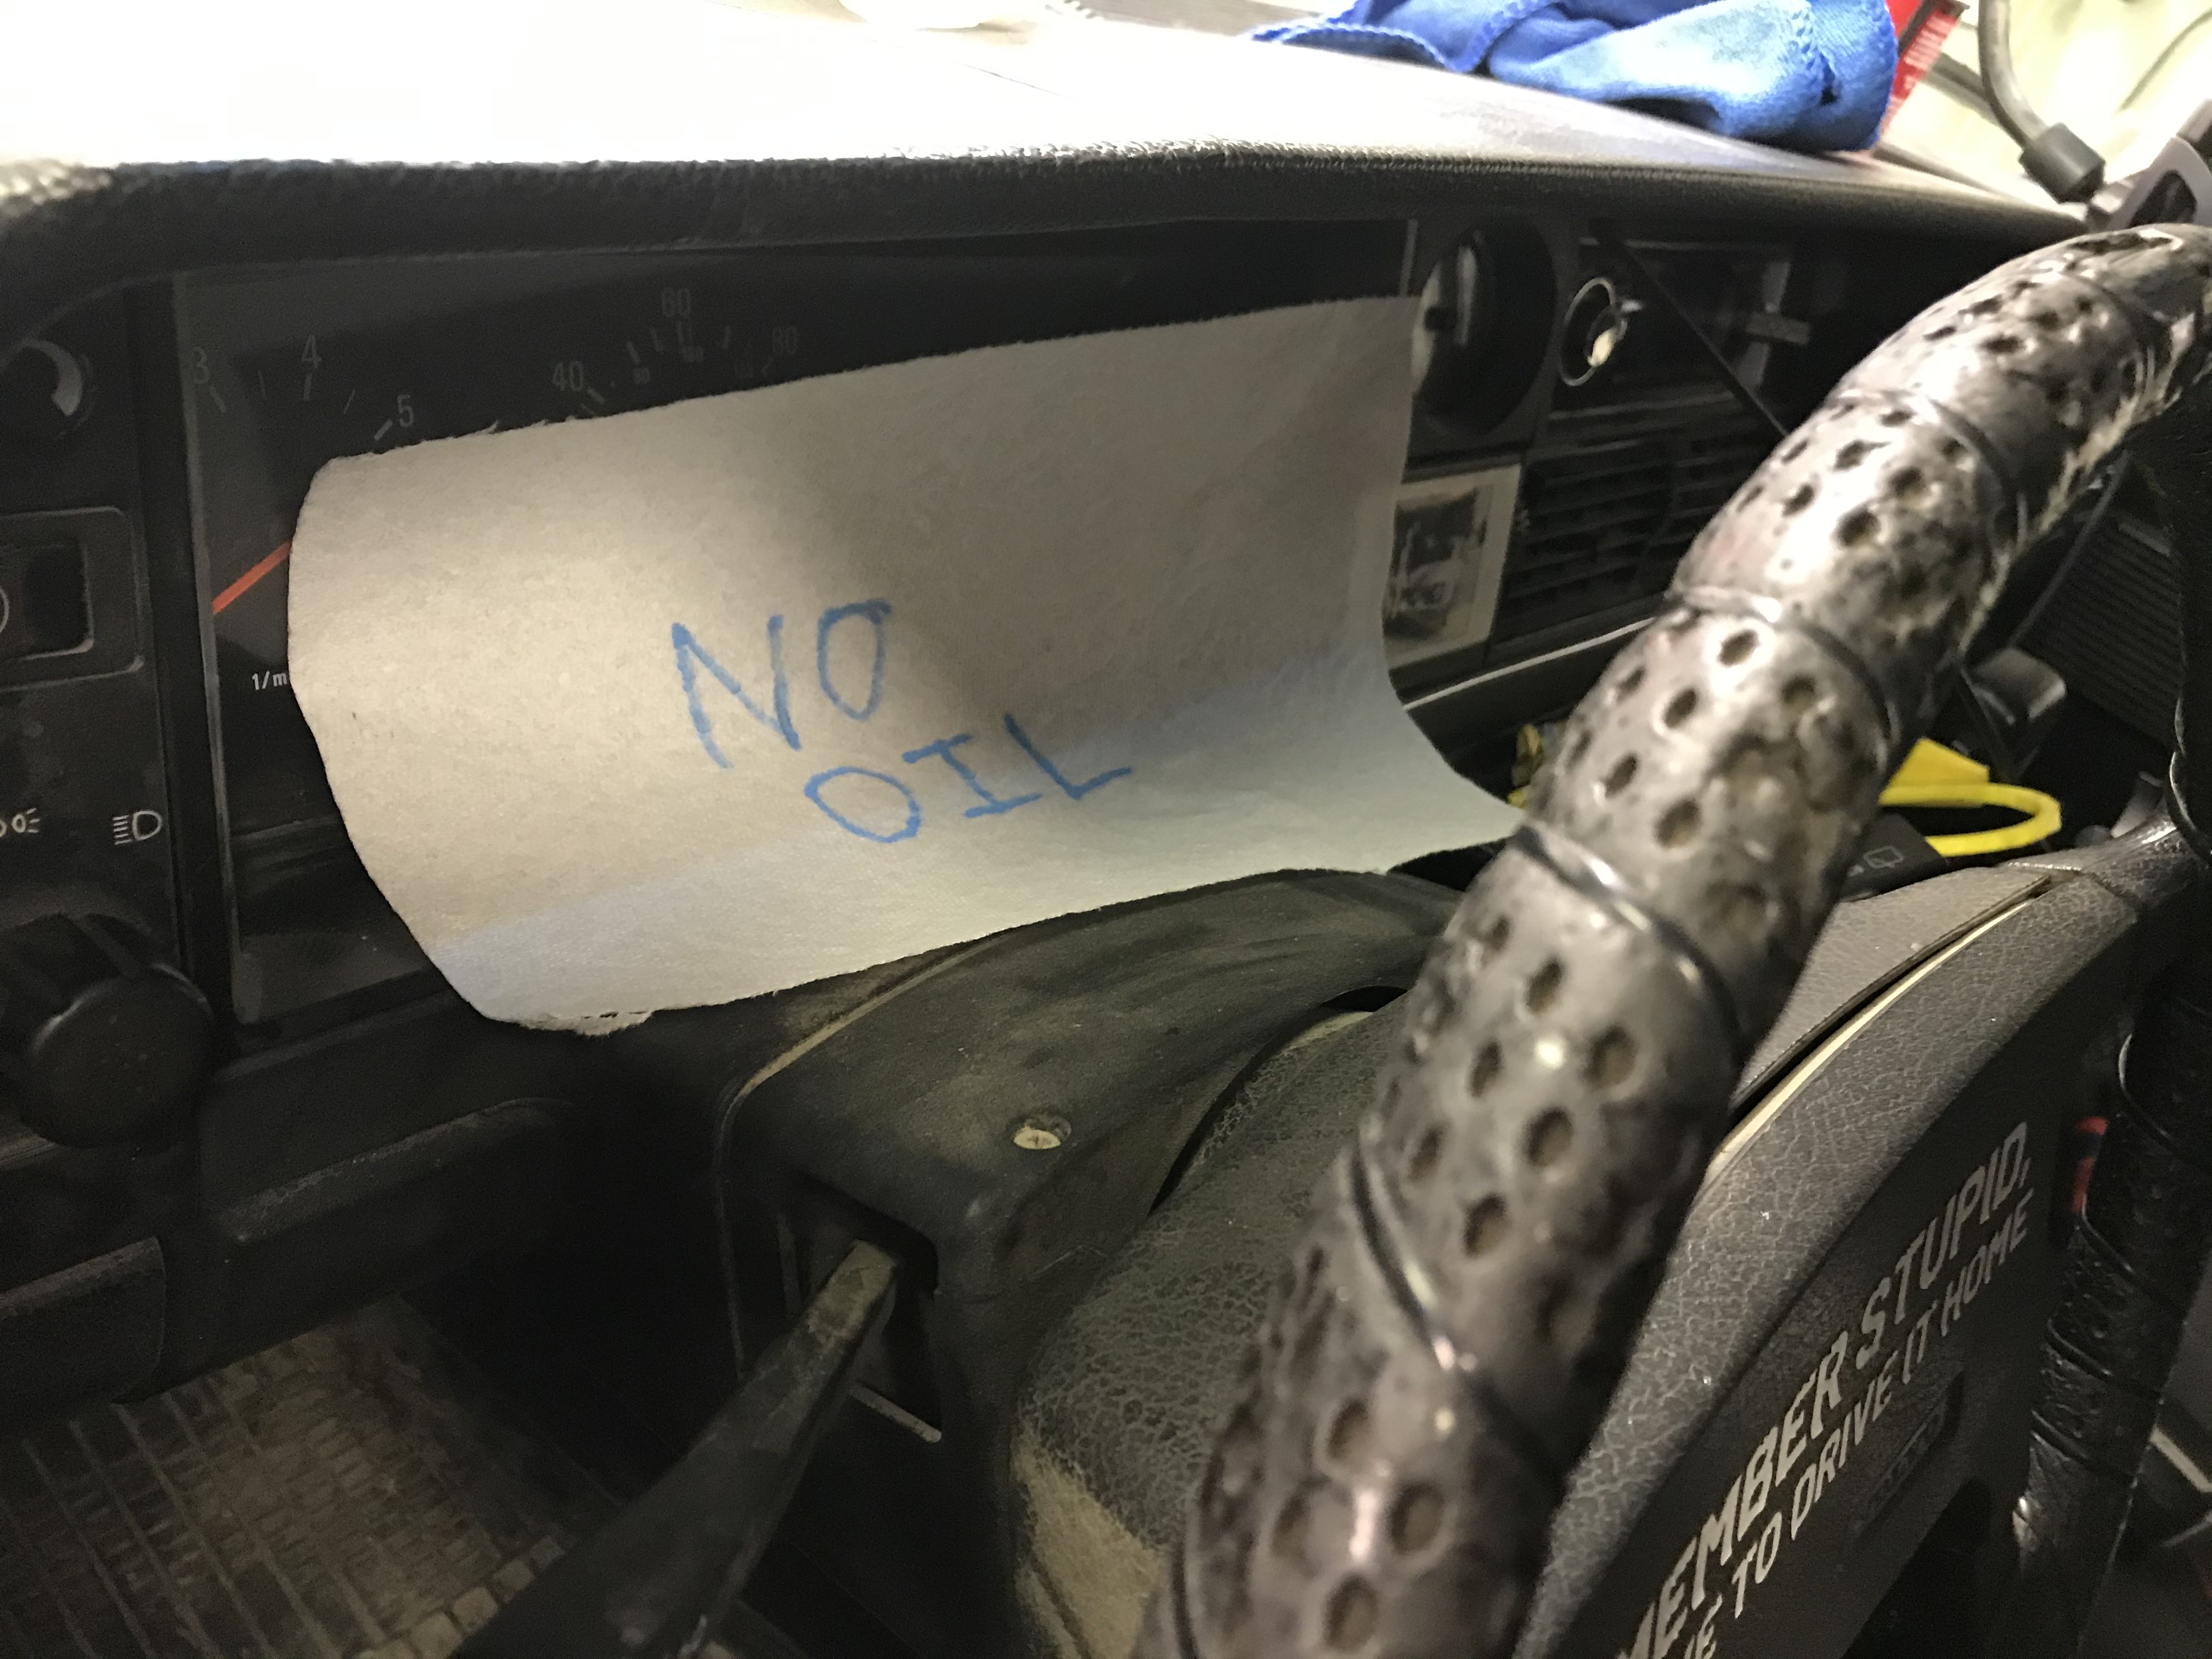 A paper towel draped over a car's instrument cluster with NO OIL written in black pen